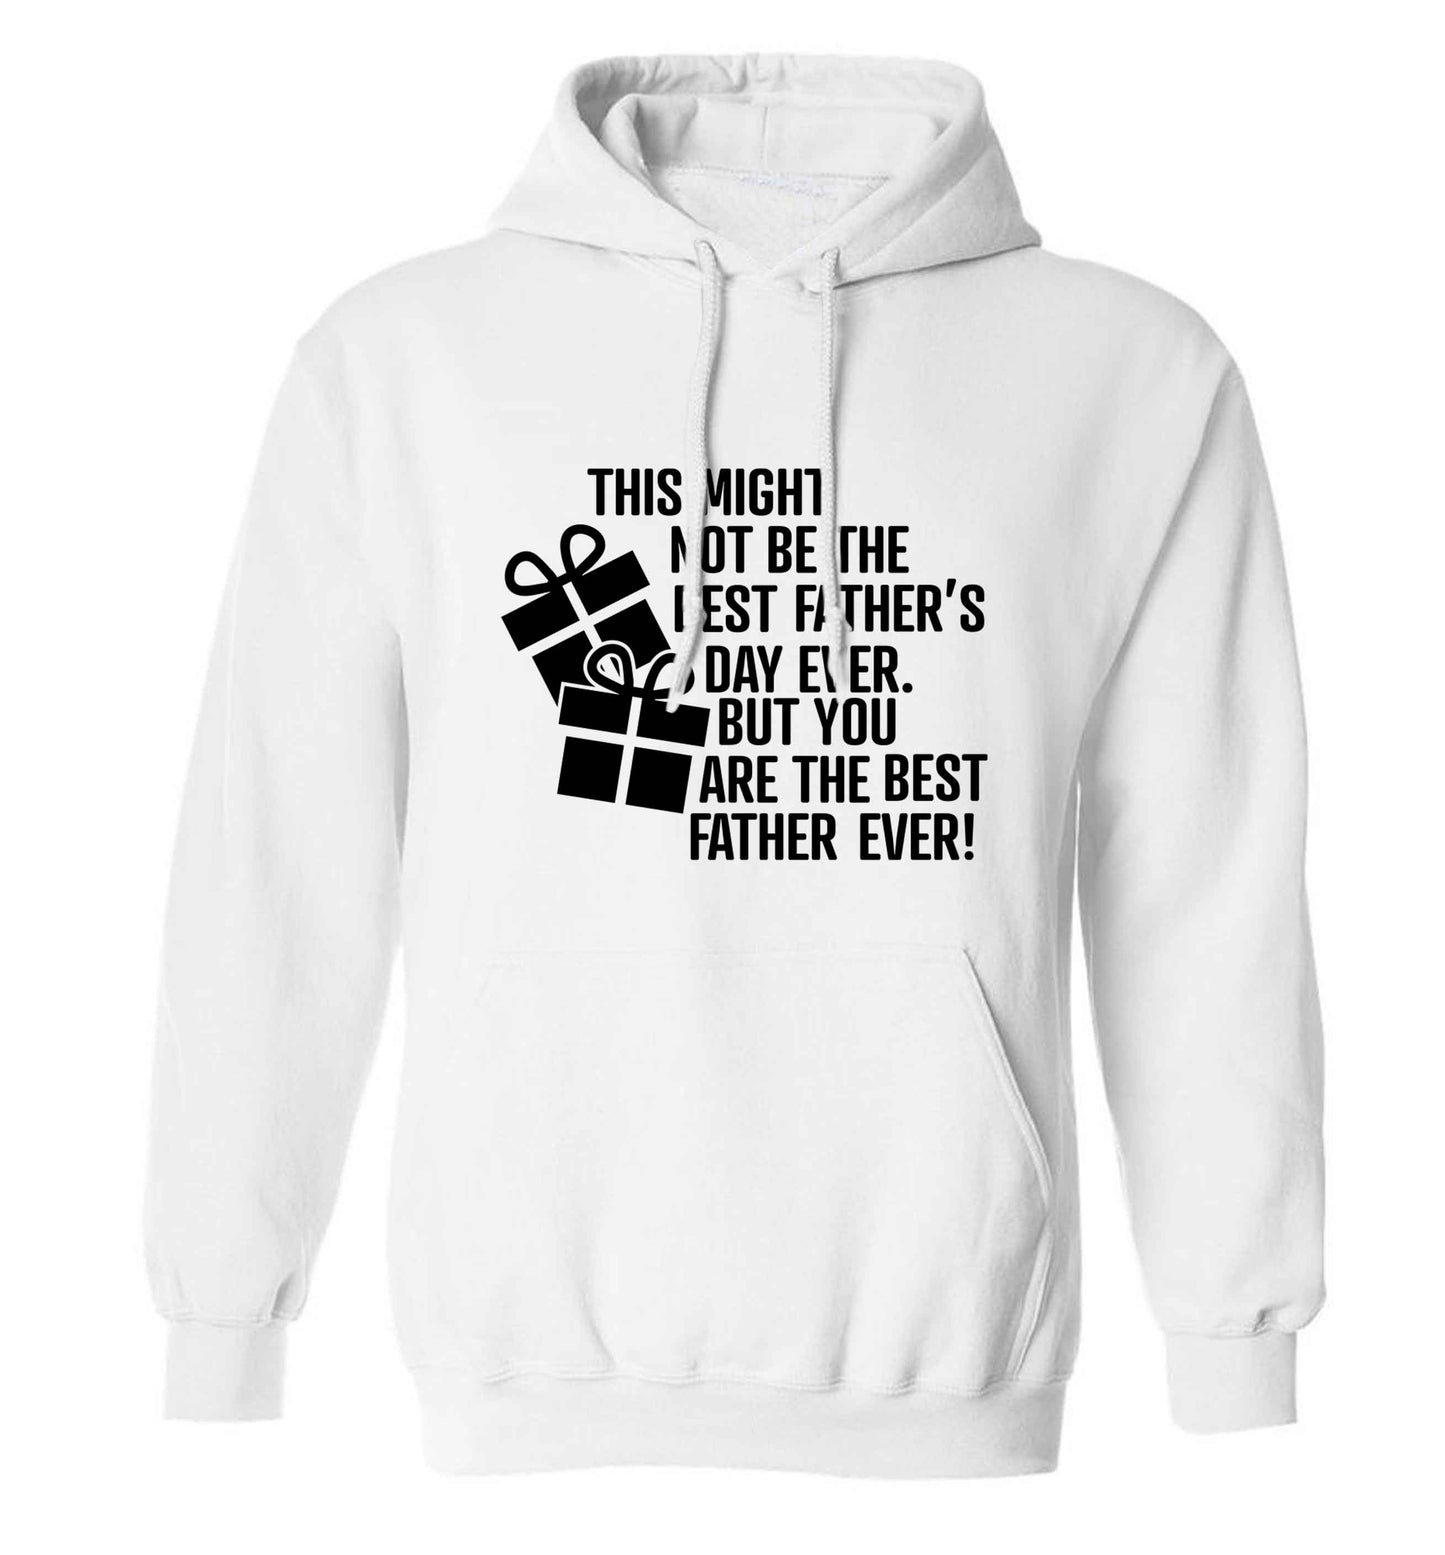 It might not be the best Father's Day ever but you are the best father ever! adults unisex white hoodie 2XL